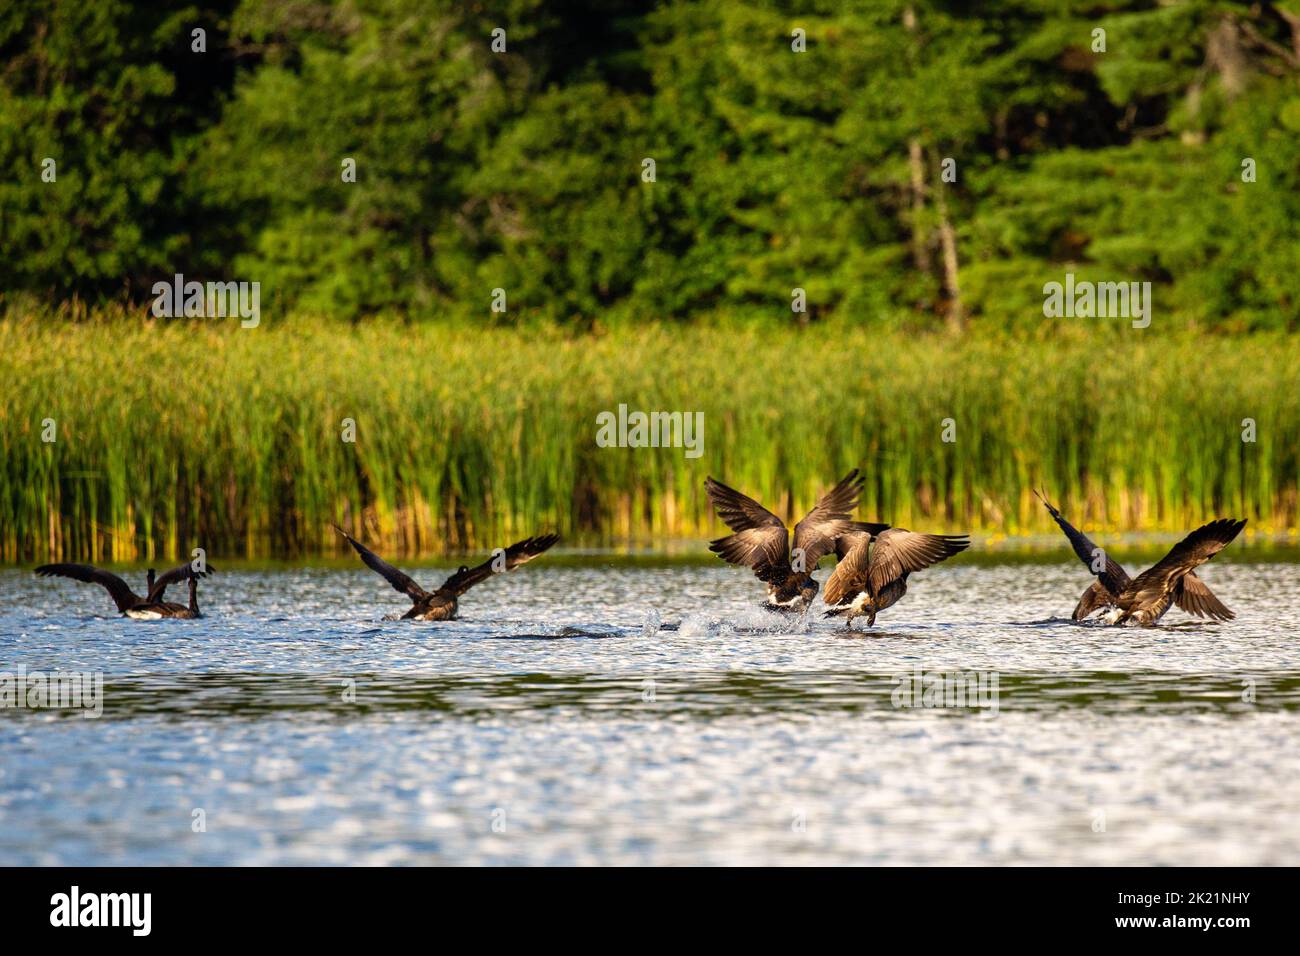 Canada goose (branta canadensis) taking off from a Wisconsin lake, horizontal Stock Photo